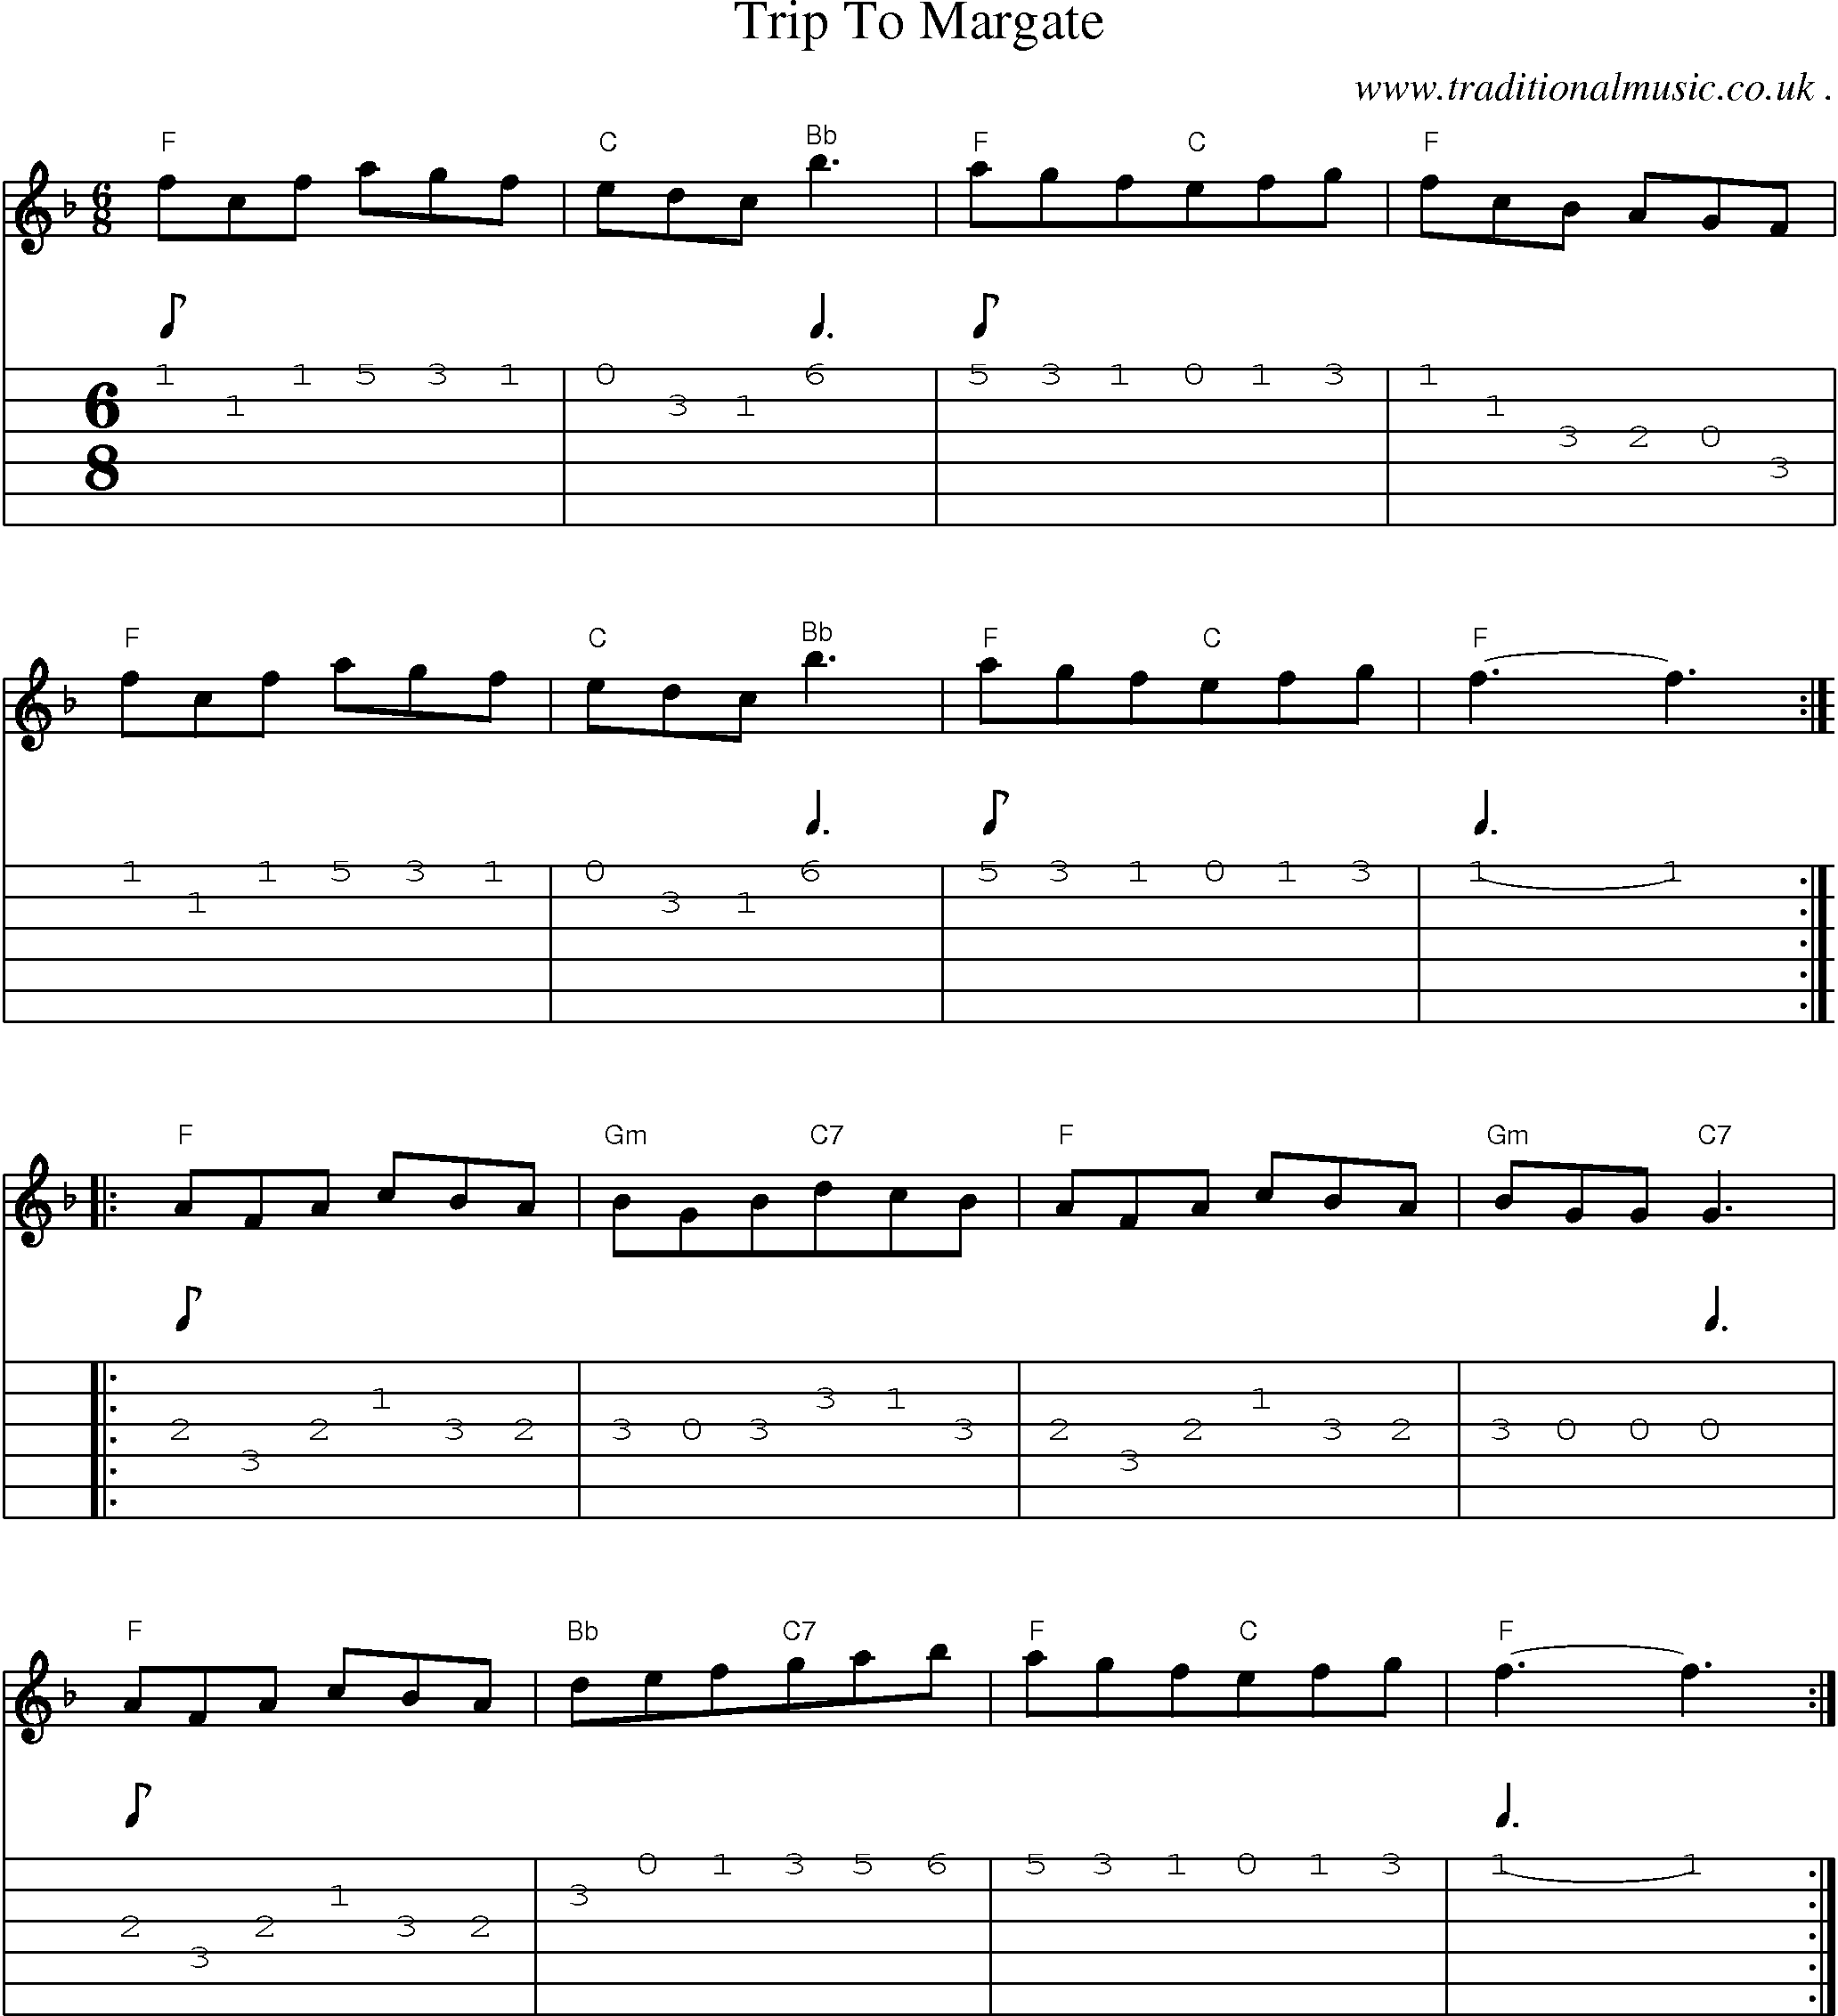 Sheet-Music and Guitar Tabs for Trip To Margate